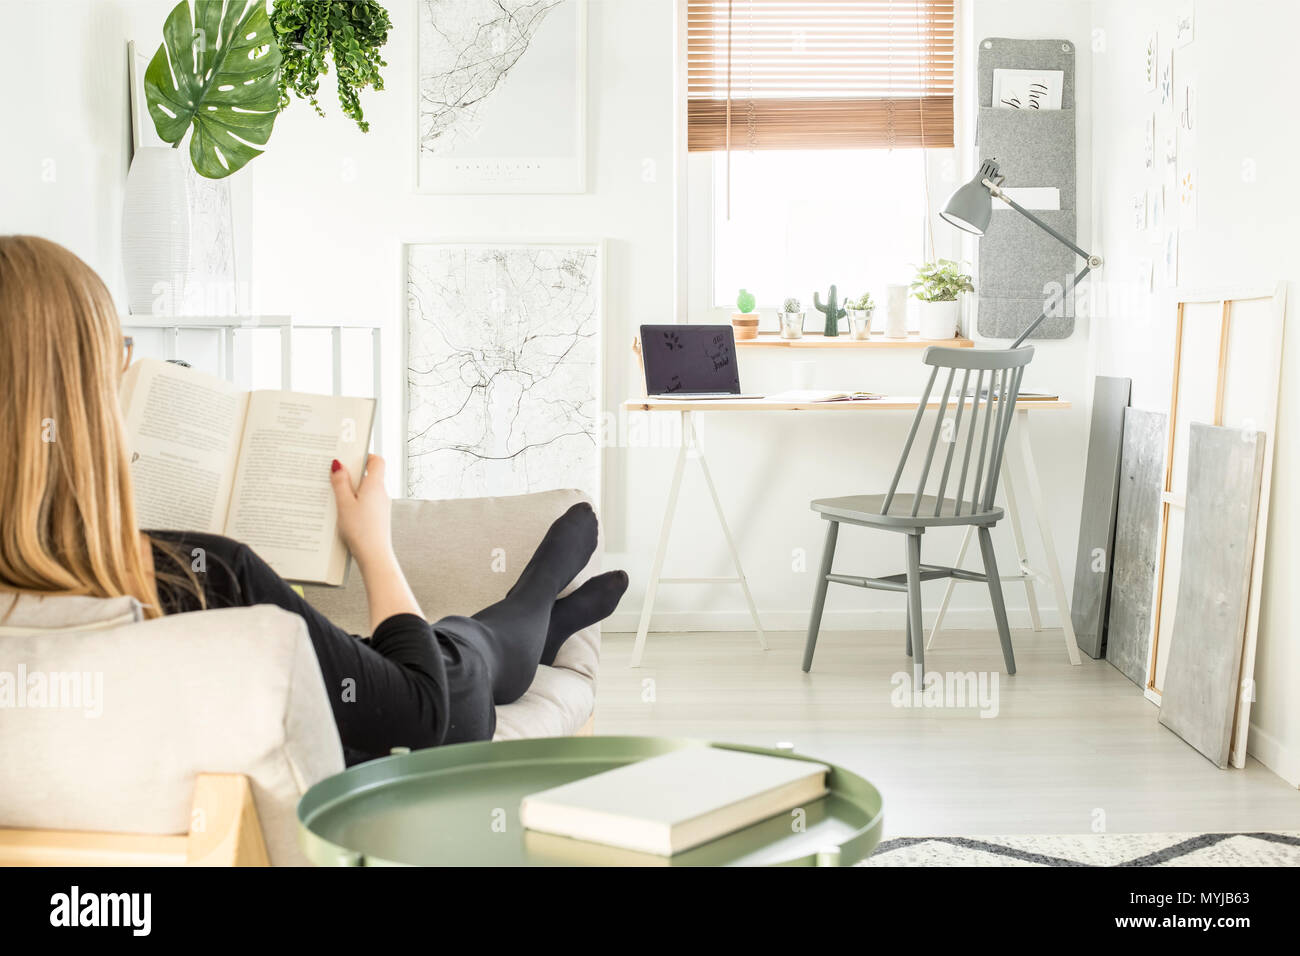 Woman reading a book on the sofa in bright home office room interior with fresh plants, lamp, laptop on desk and posters Stock Photo